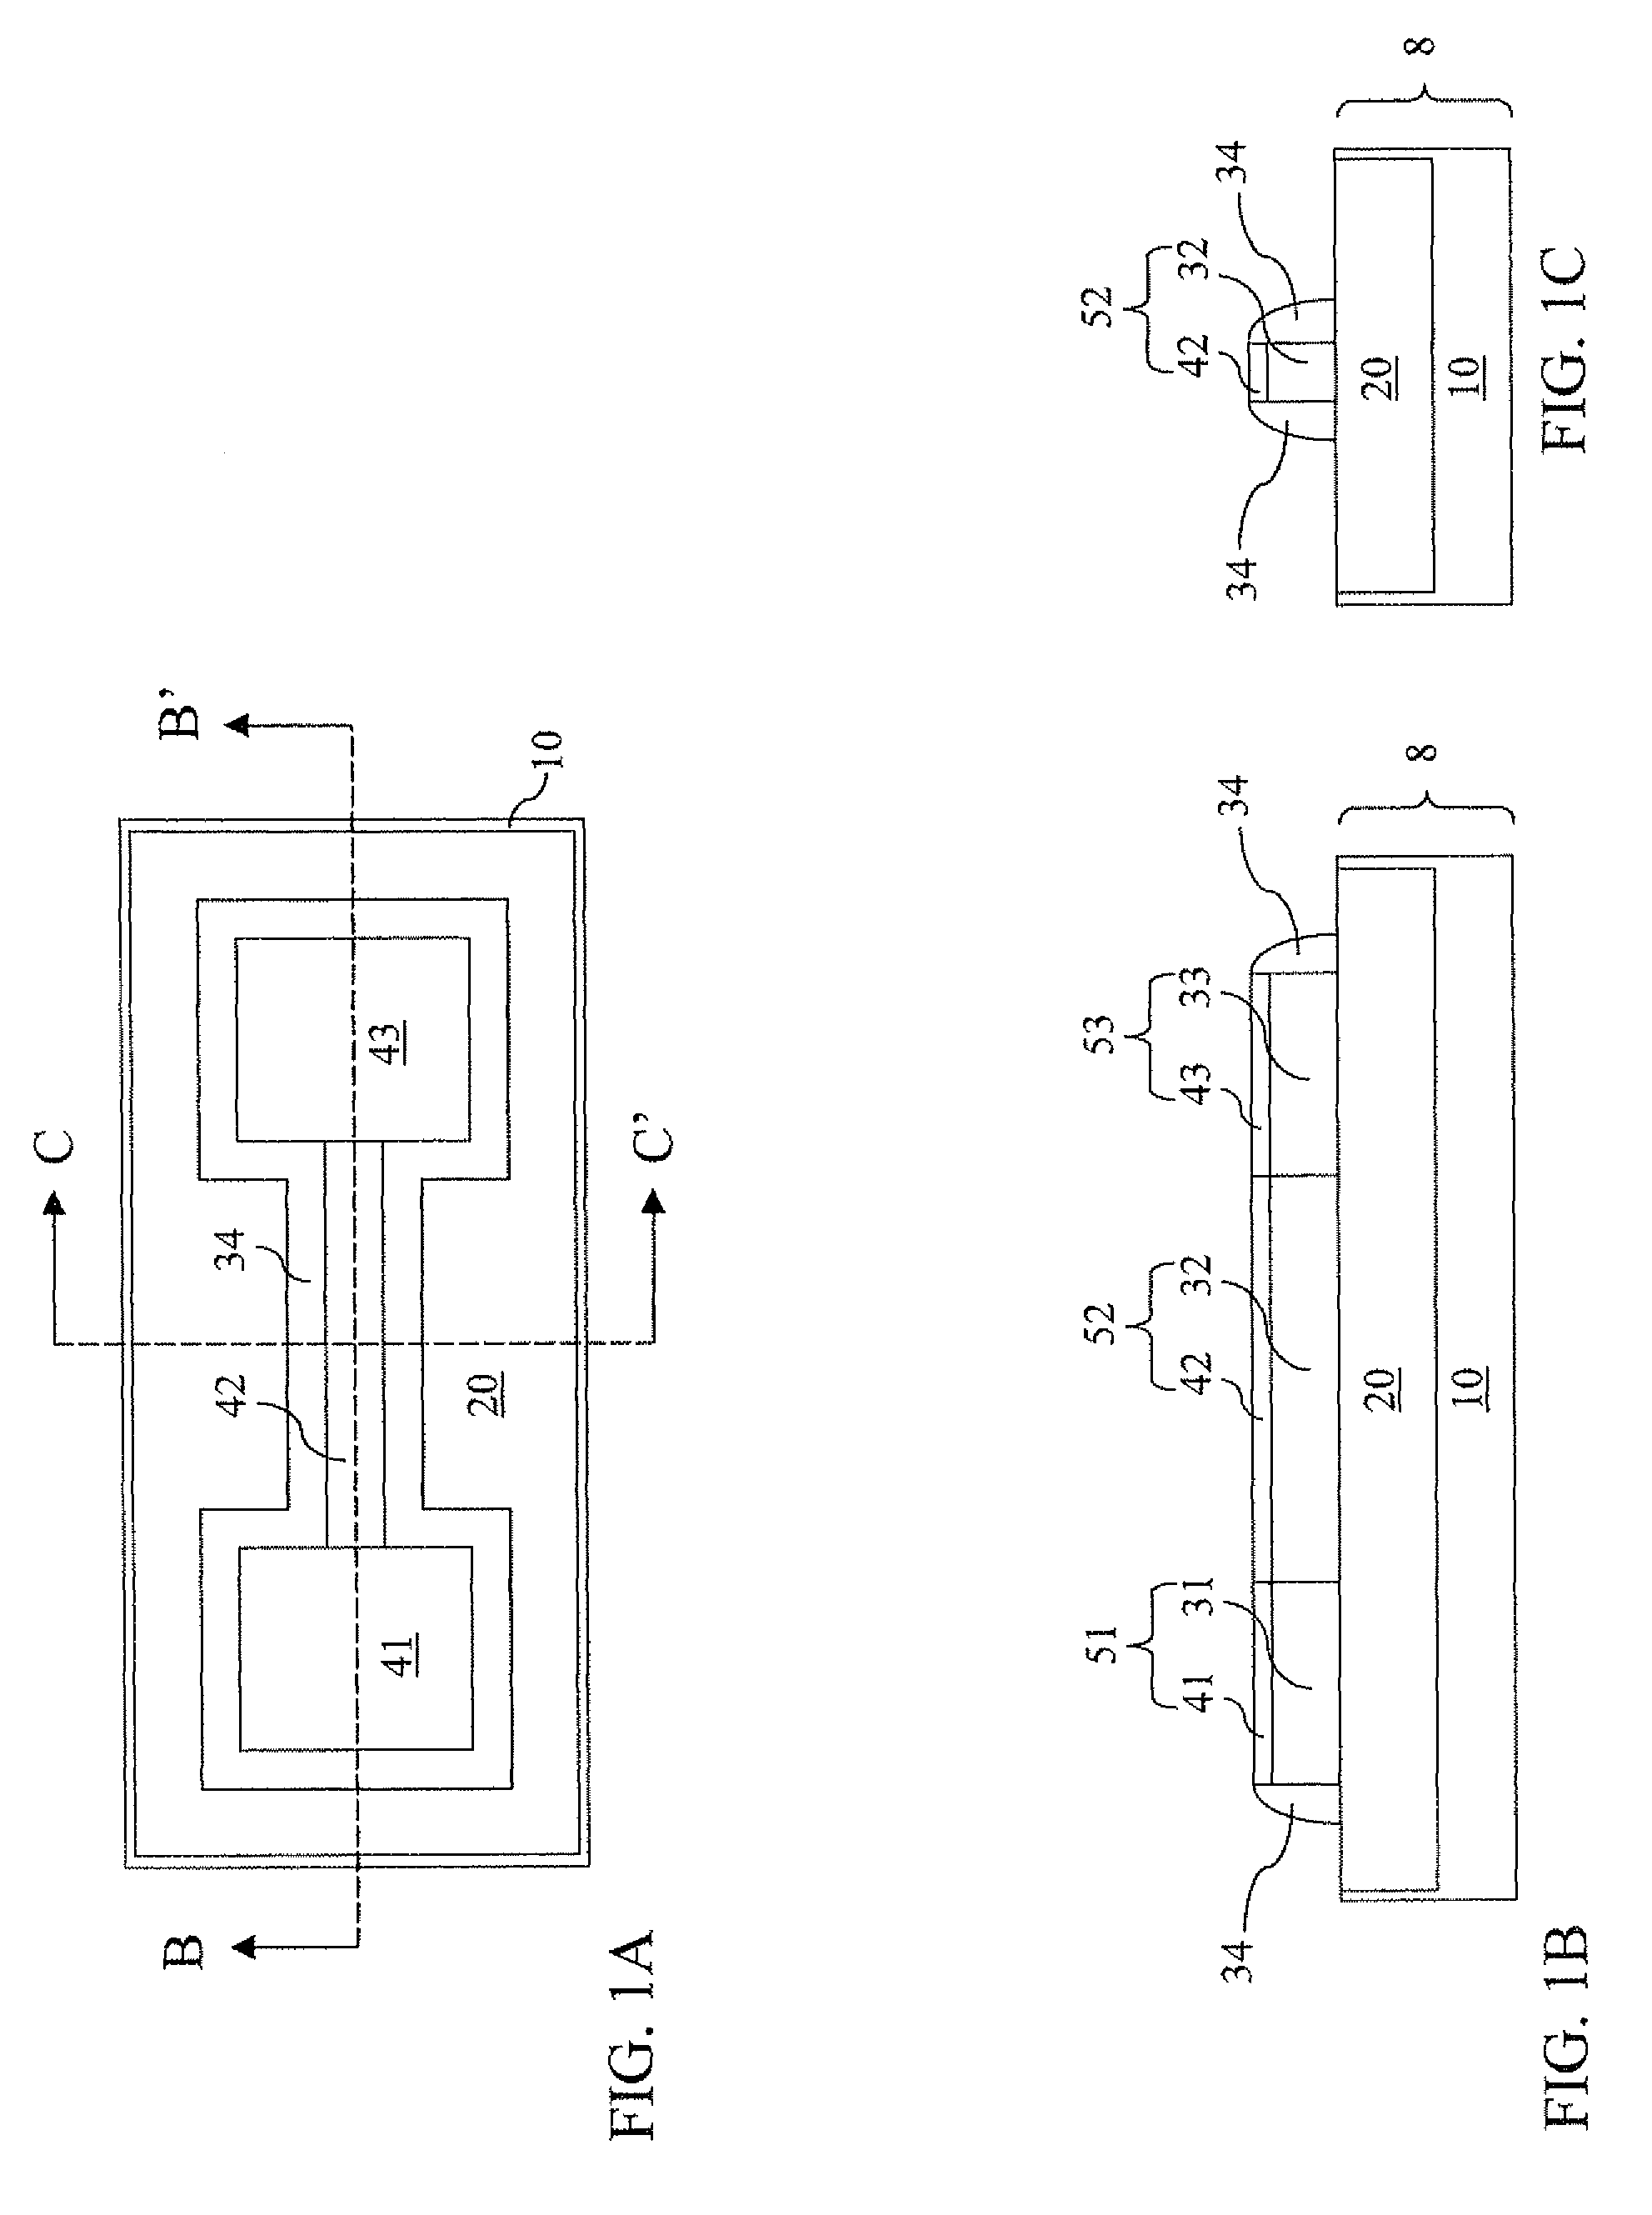 Electrical fuse having a cavity thereupon